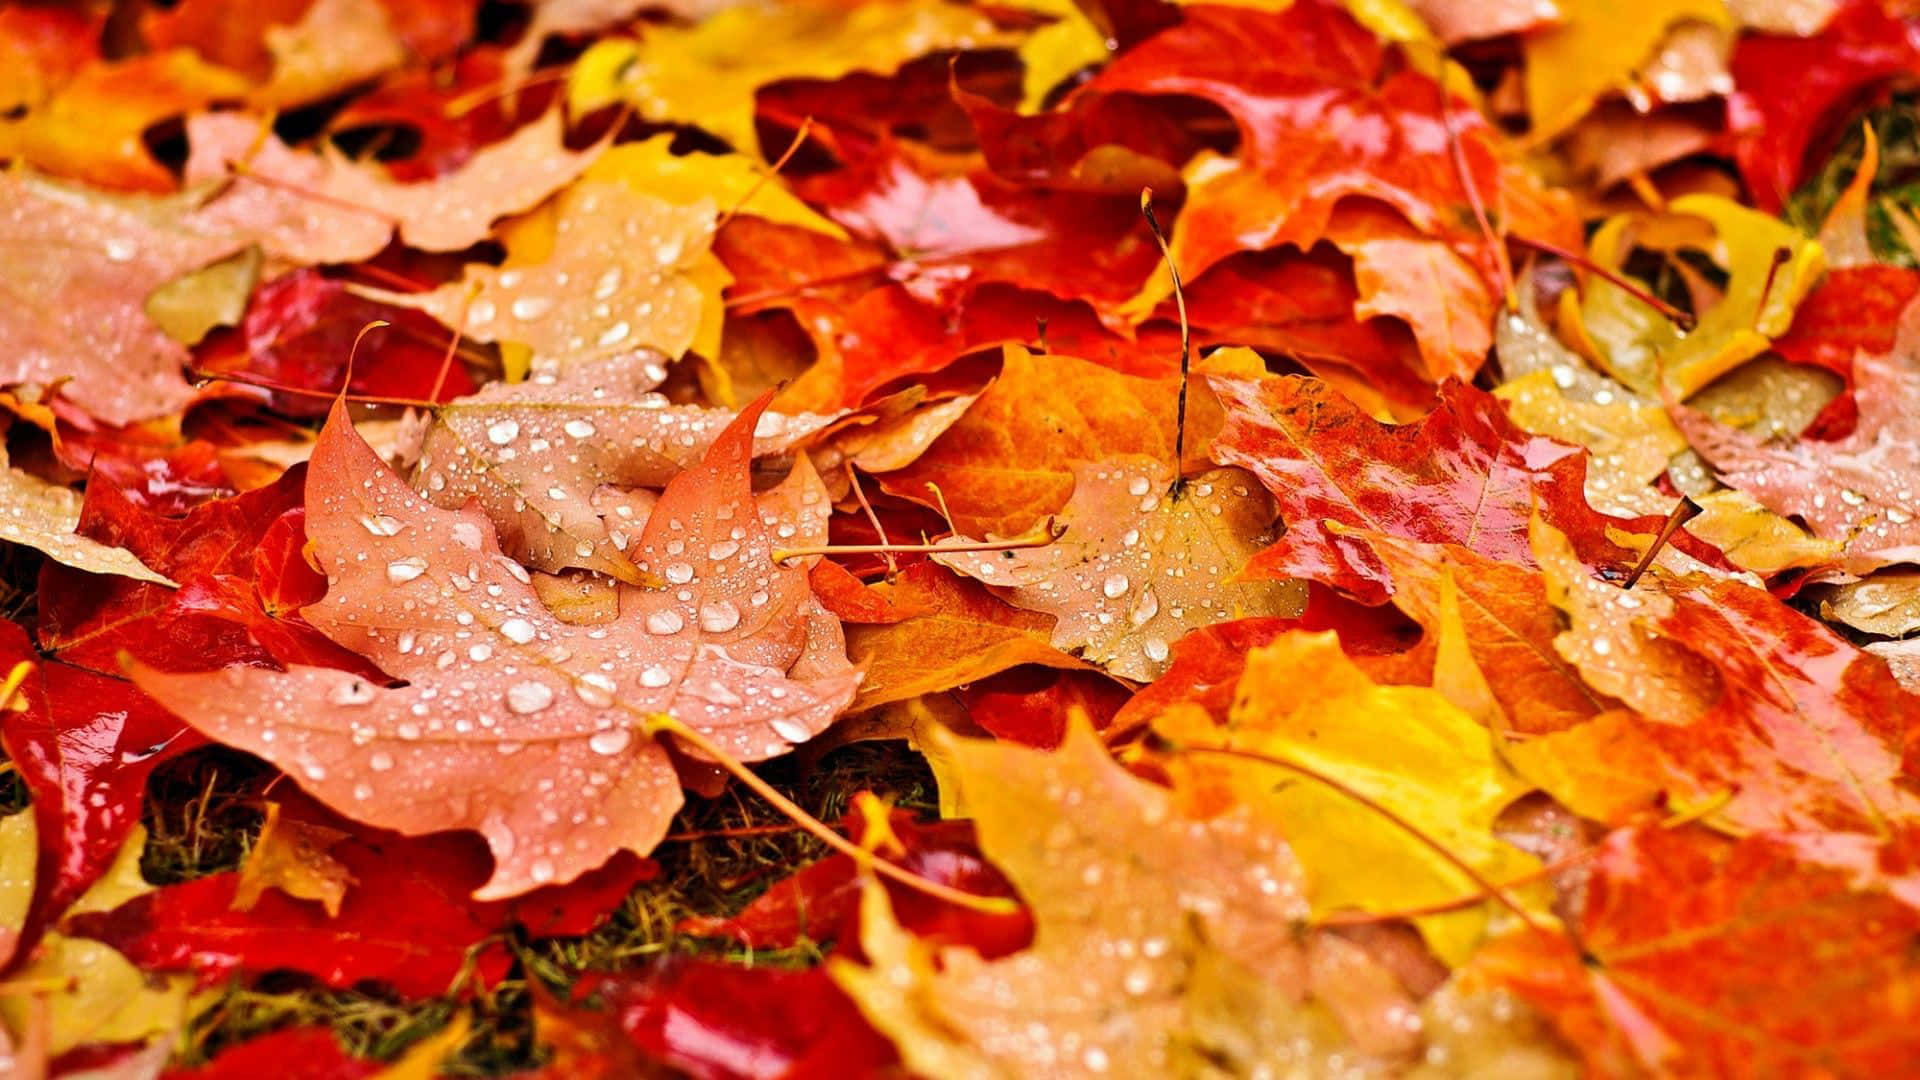 Caption: Morning Dew on Colorful Autumn Leaves Wallpaper